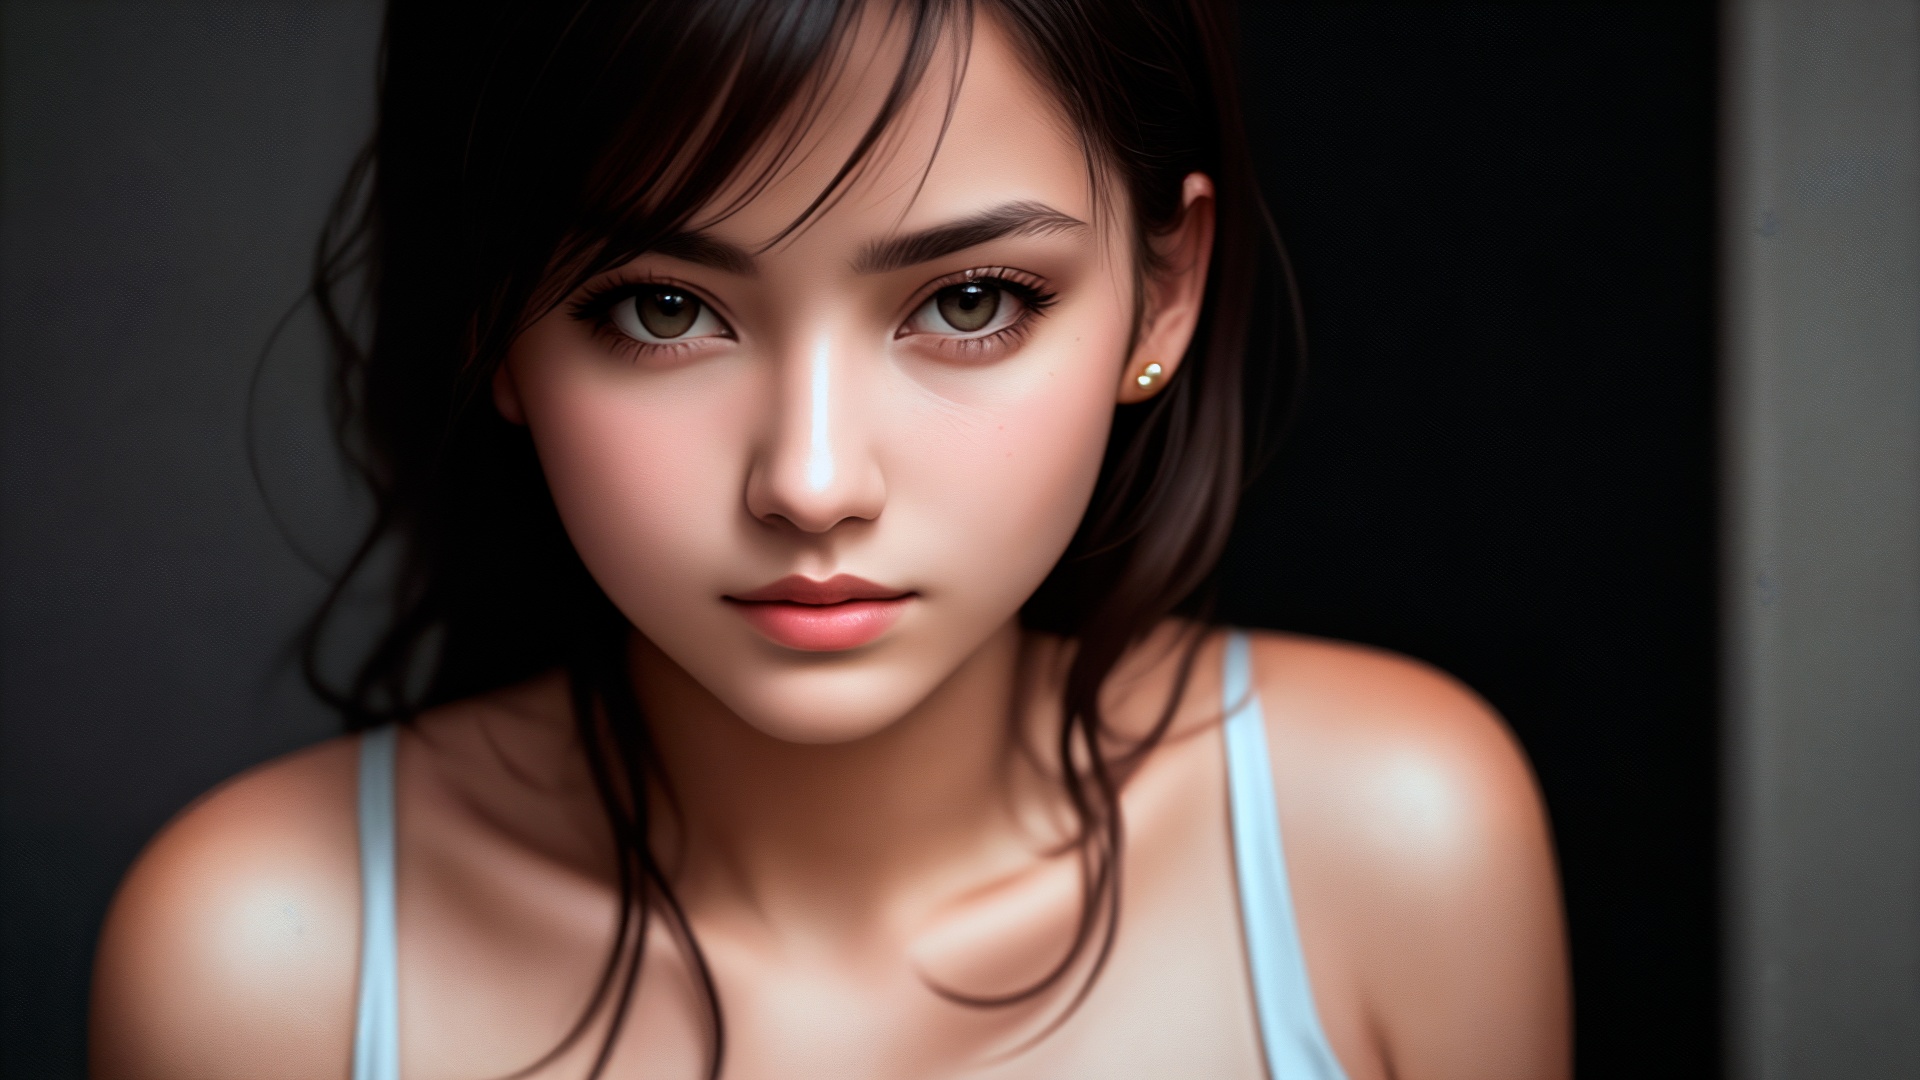 Your New Wallpaper Beautiful Woman 4 by thuking83 on DeviantArt